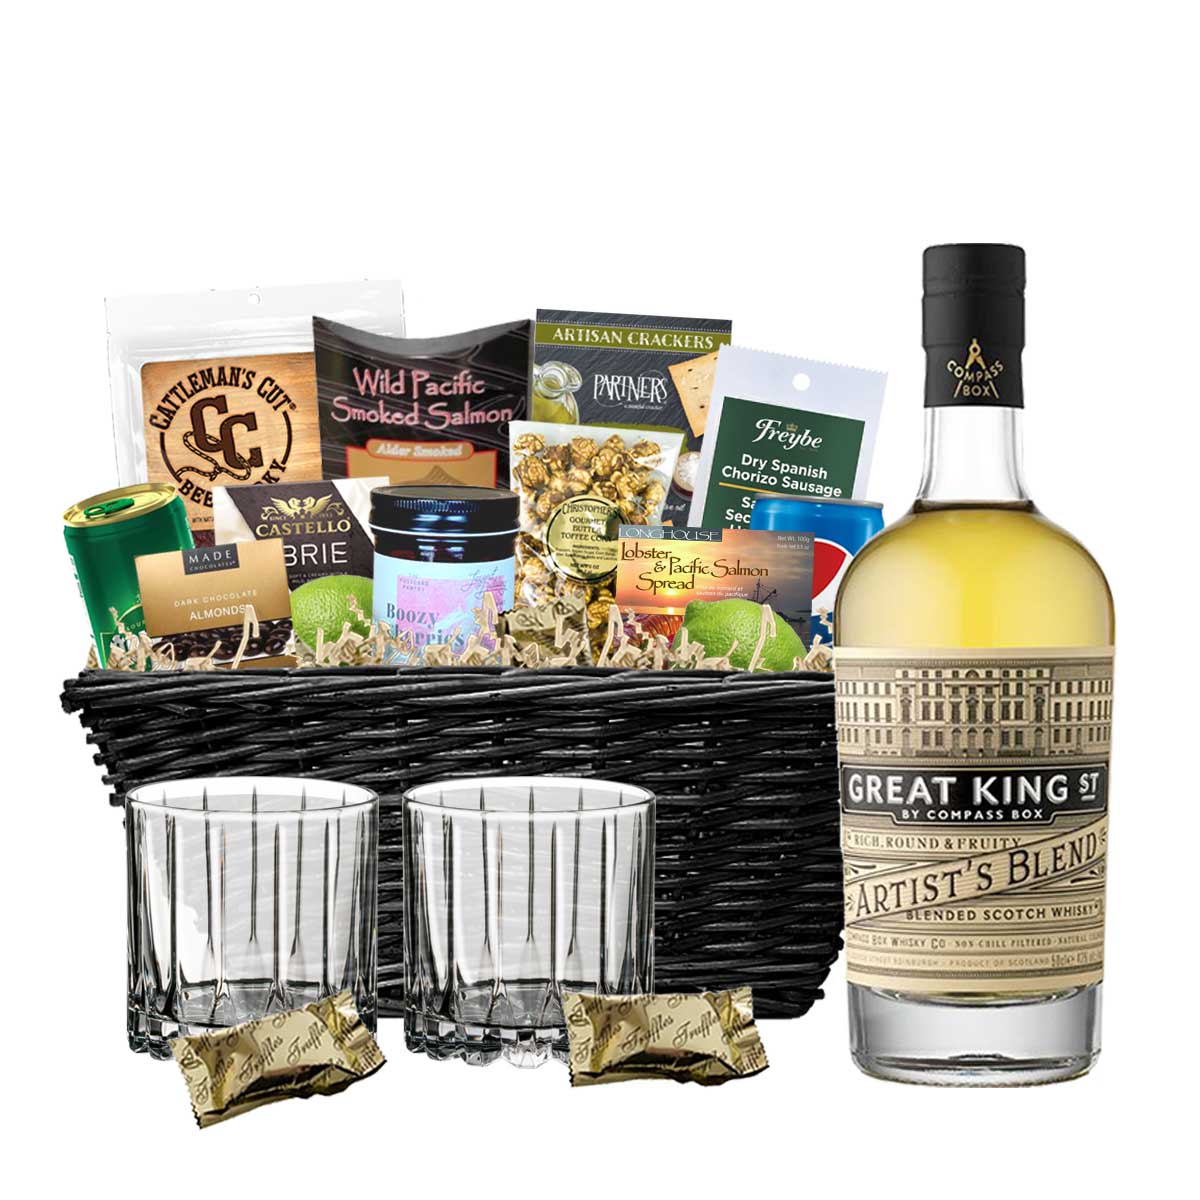 TAG Liquor Stores BC - Compass Box Great King Street Artist's Blend Scotch Whisky 750ml Gift Basket